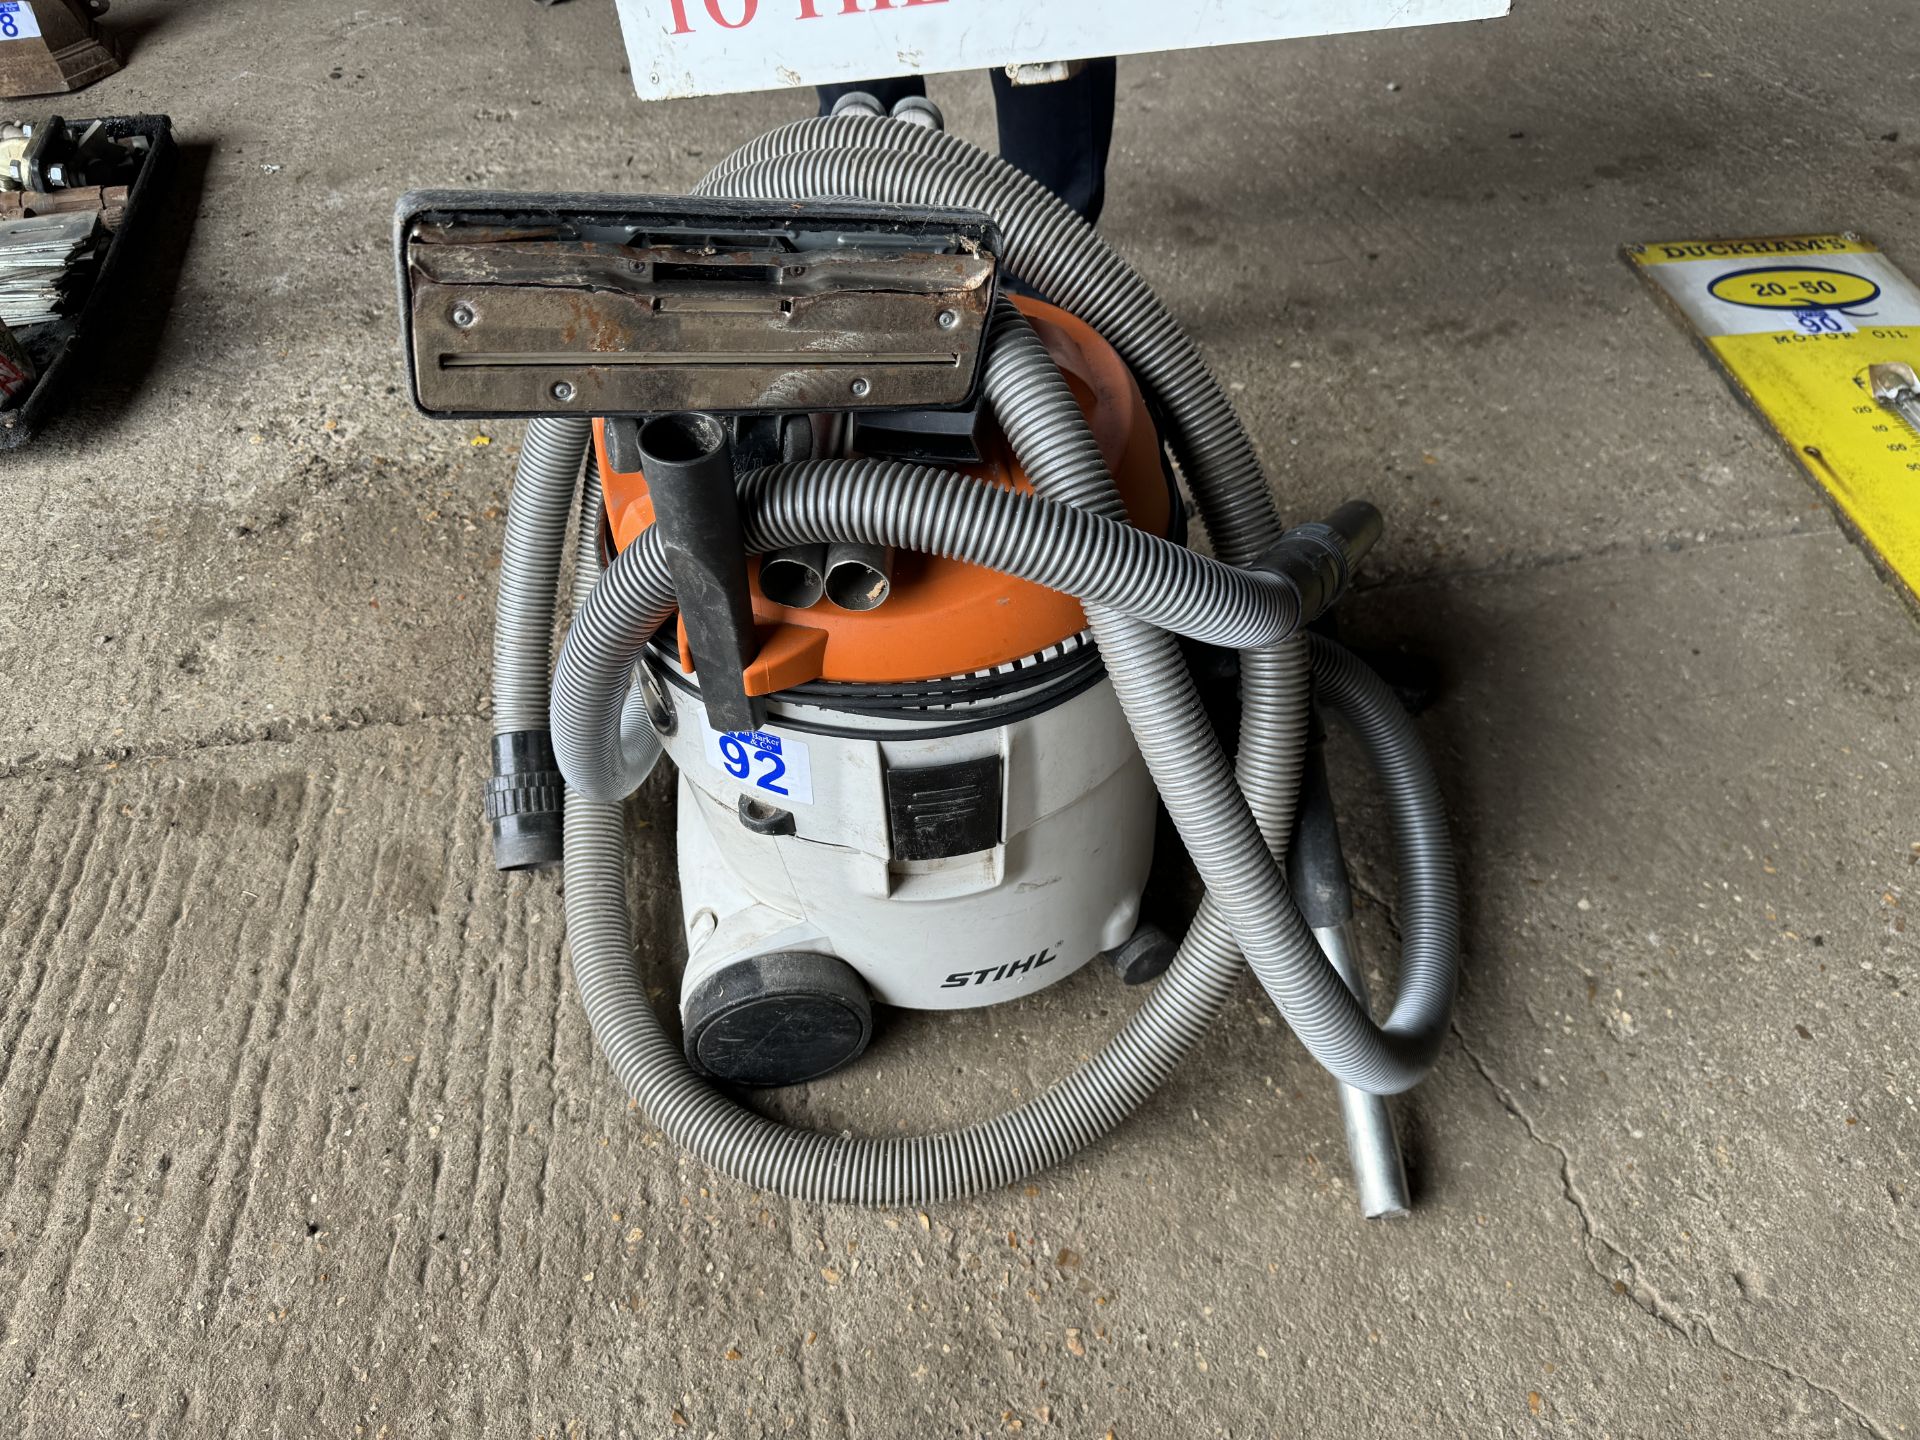 Stihl vacuum cleaner, passed PAT test, manual in office - Image 2 of 2